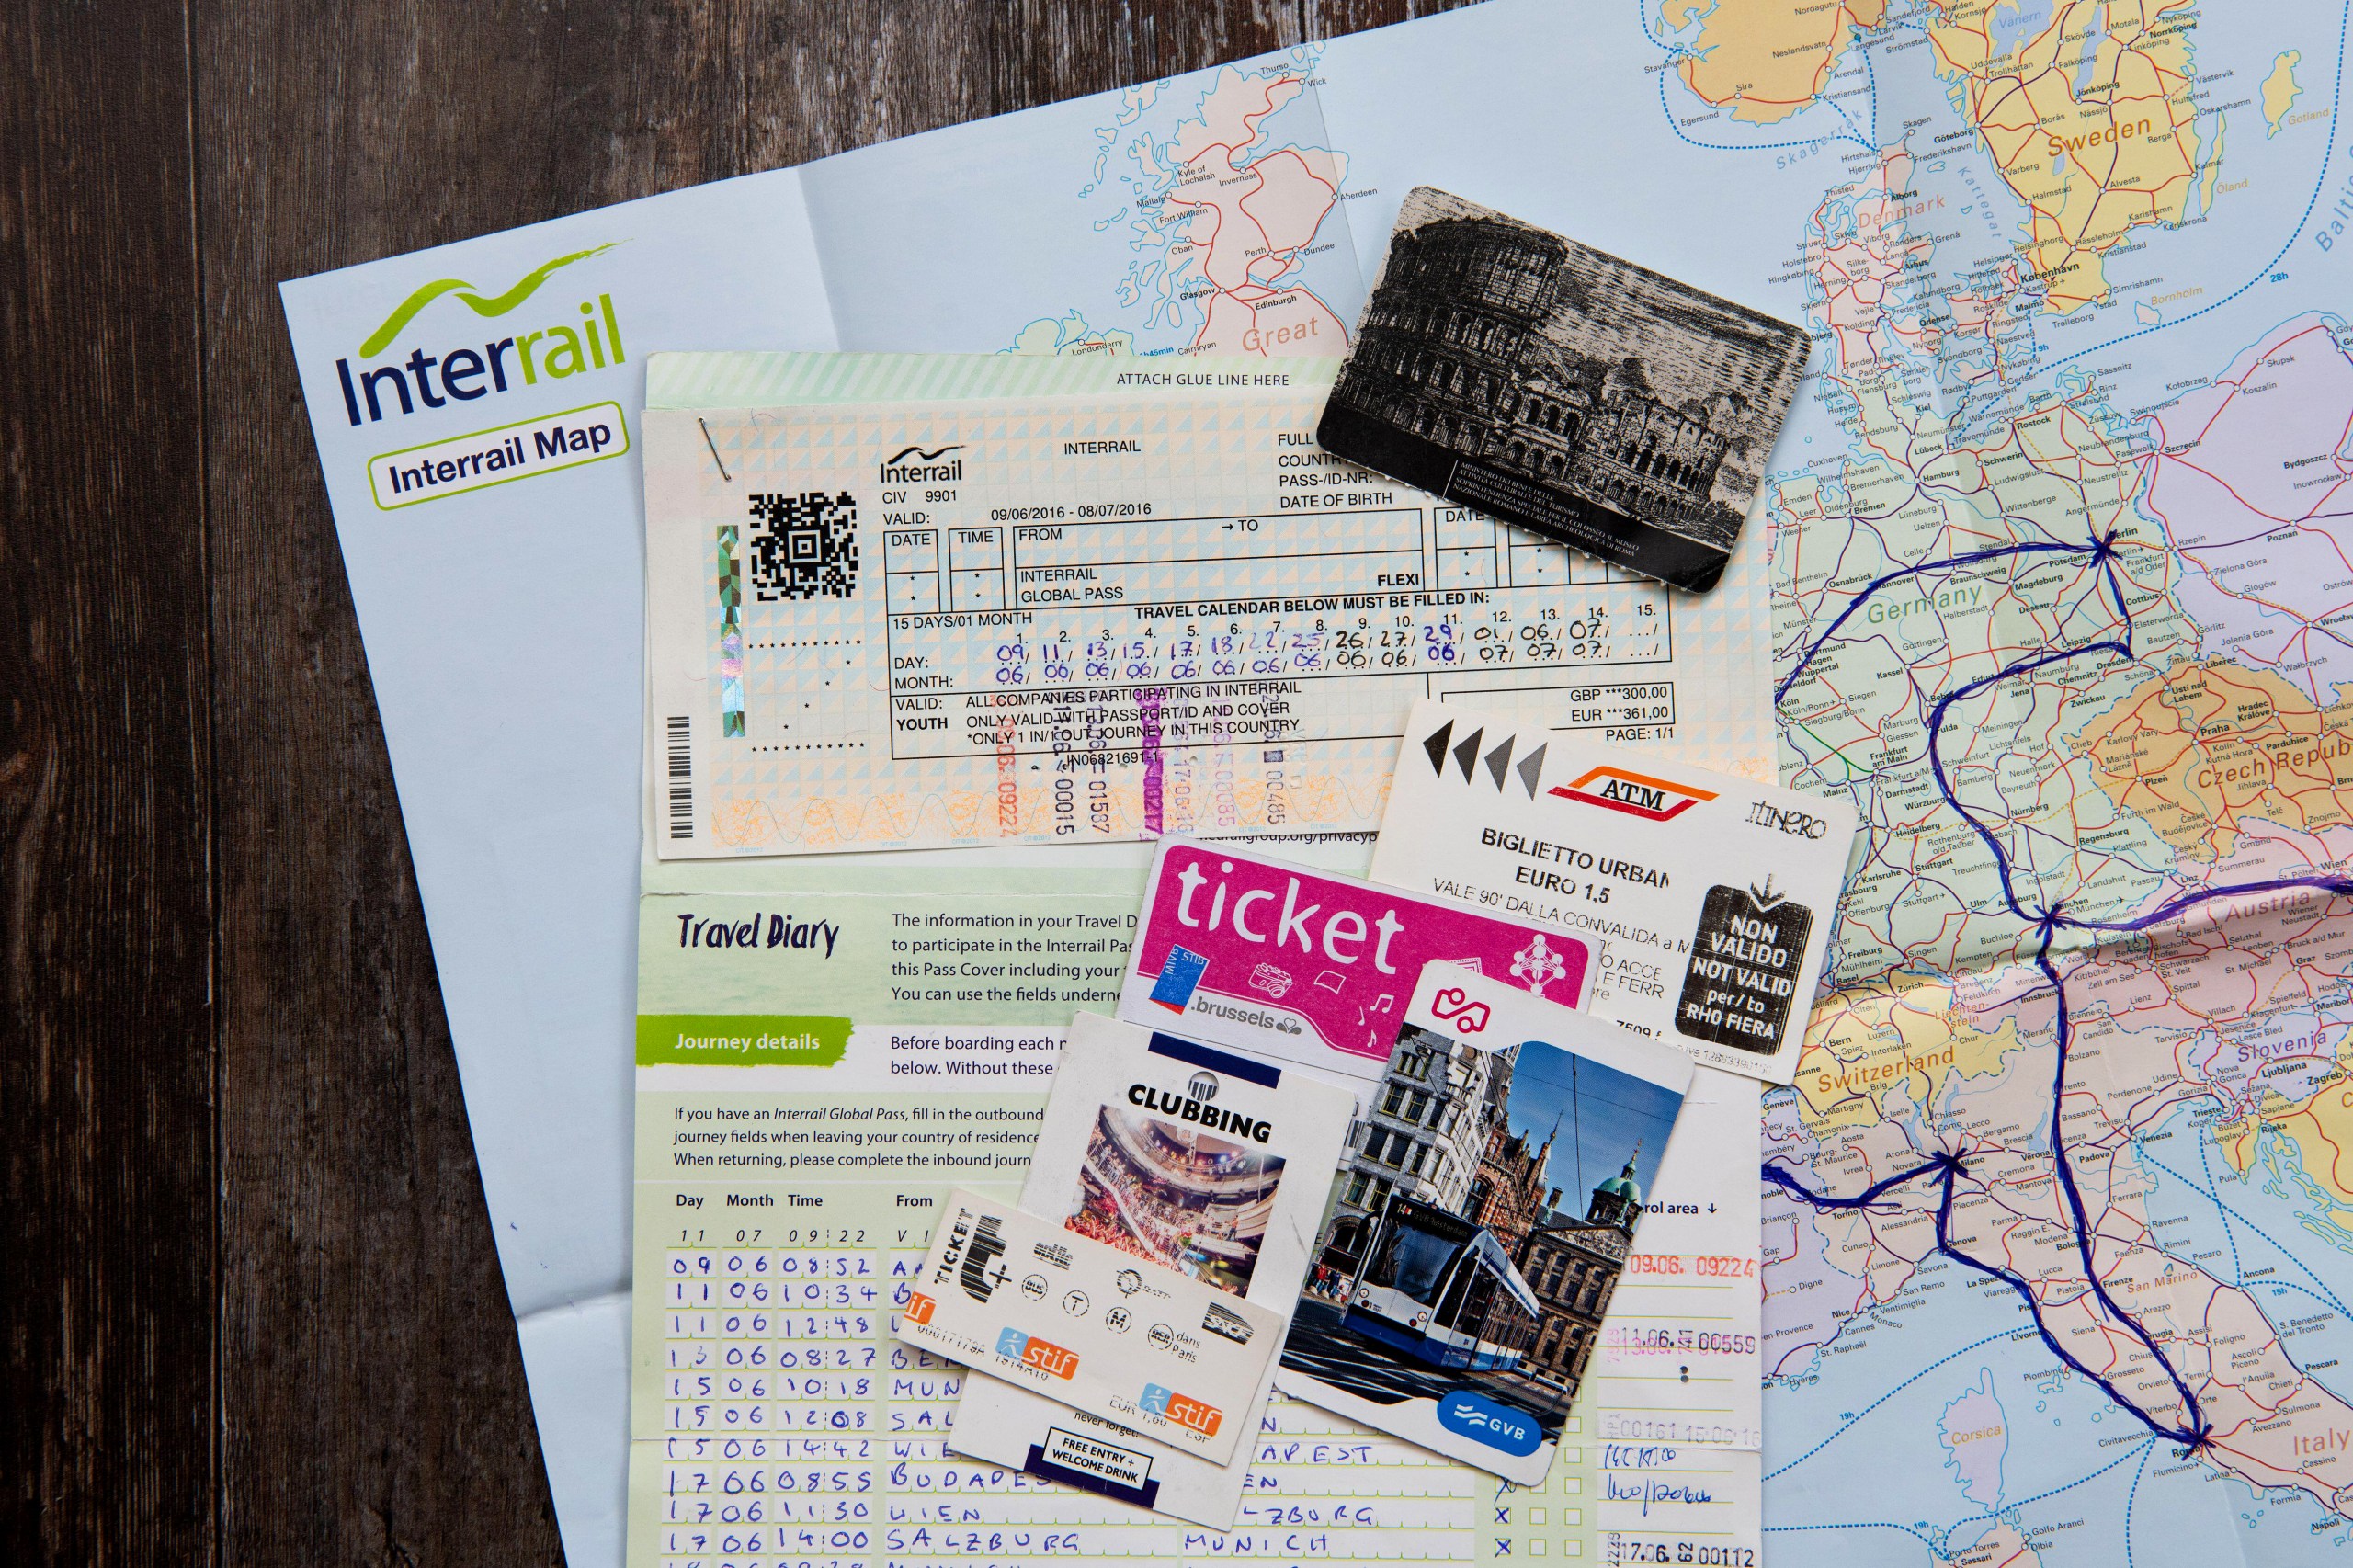 Interrail gives you access to most trains in Europe (Alamy)